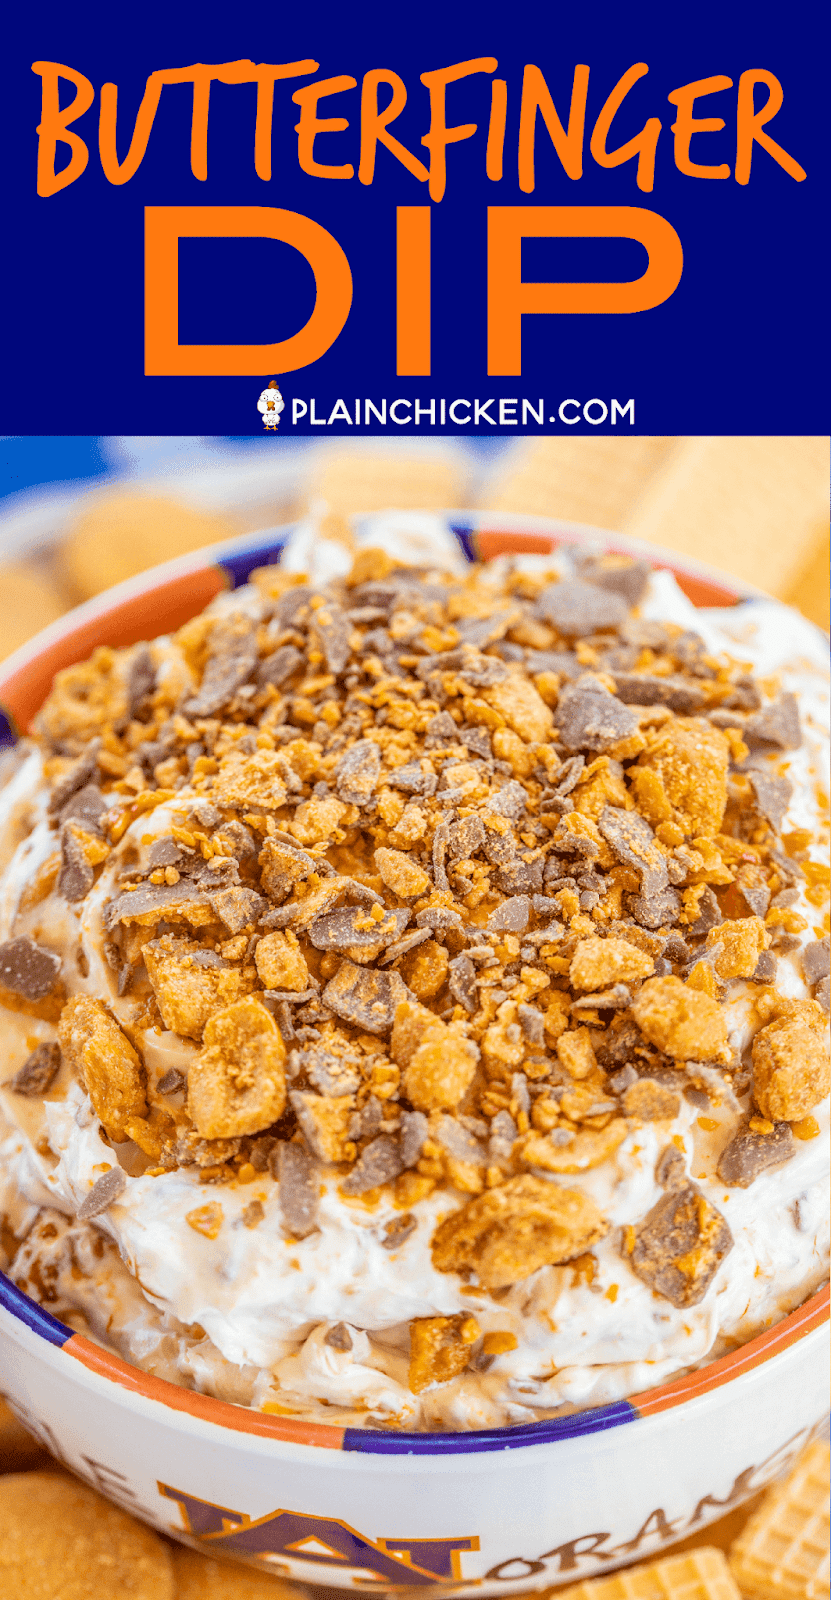 Butterfinger Dip - only 4 ingredients and ready in minutes!!! This stuff should come with a warning label - SO good!!! Cream cheese, cool whip, brown sugar and butterfinger candy bars. Serve with vanilla wafers, sugar cookies, fruit, graham crackers or pretzels. Can make a day in advance and refrigerate until ready to serve. Great for tailgating and holiday parties!! Everyone RAVES about this yummy dessert dip! #dessert #dip #partyfood #butterfingers